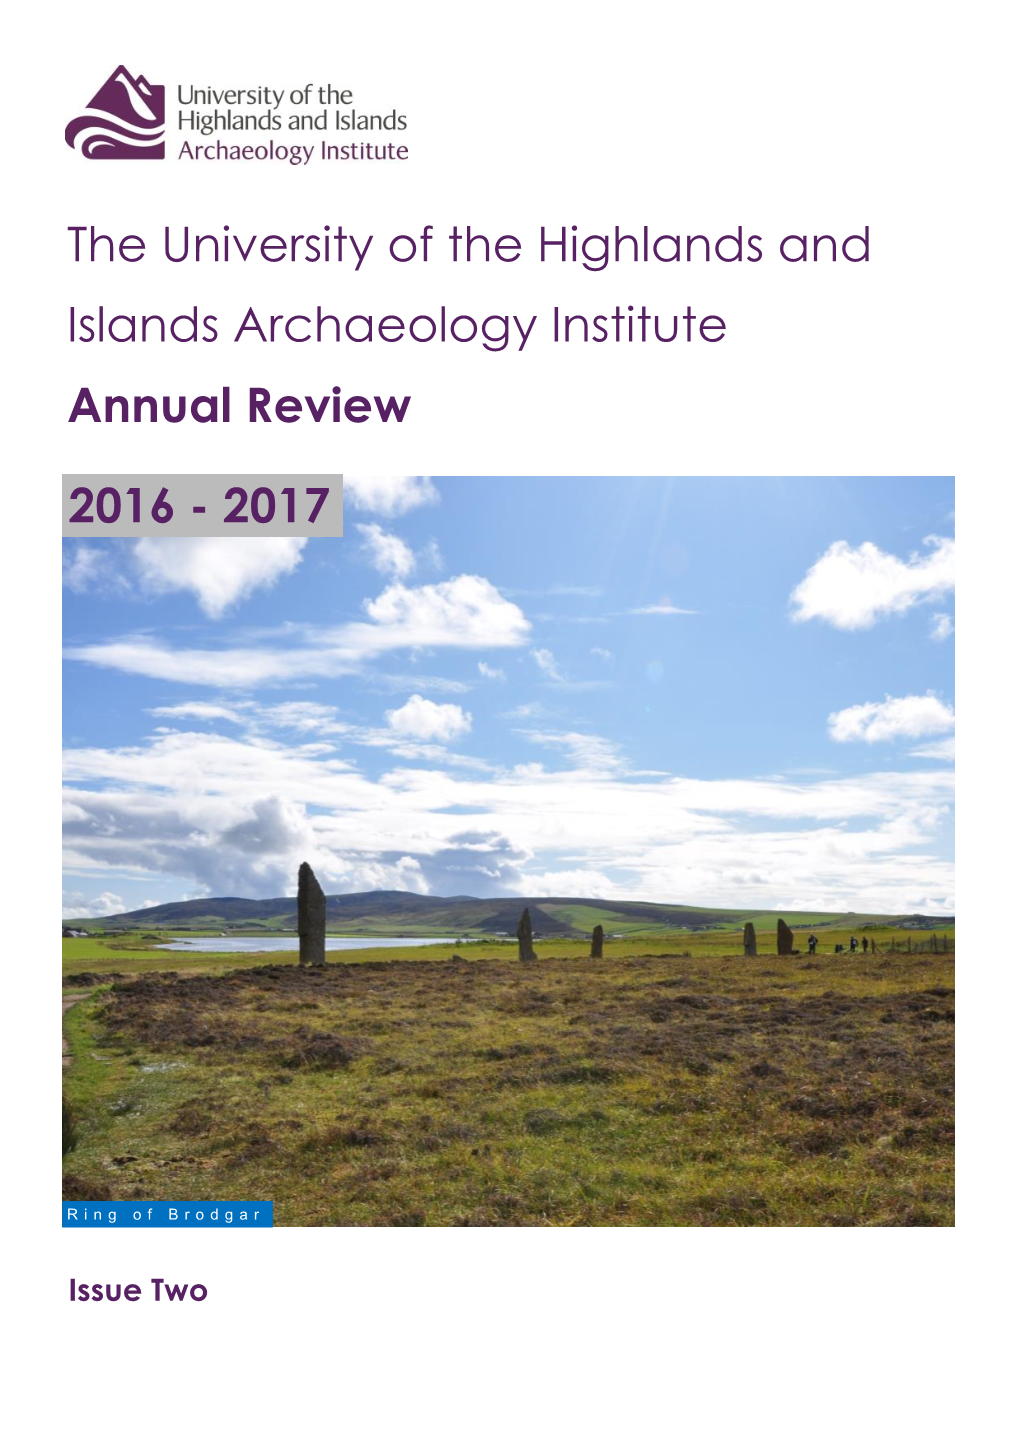 Download UHI Archaeology Institute Annual Review